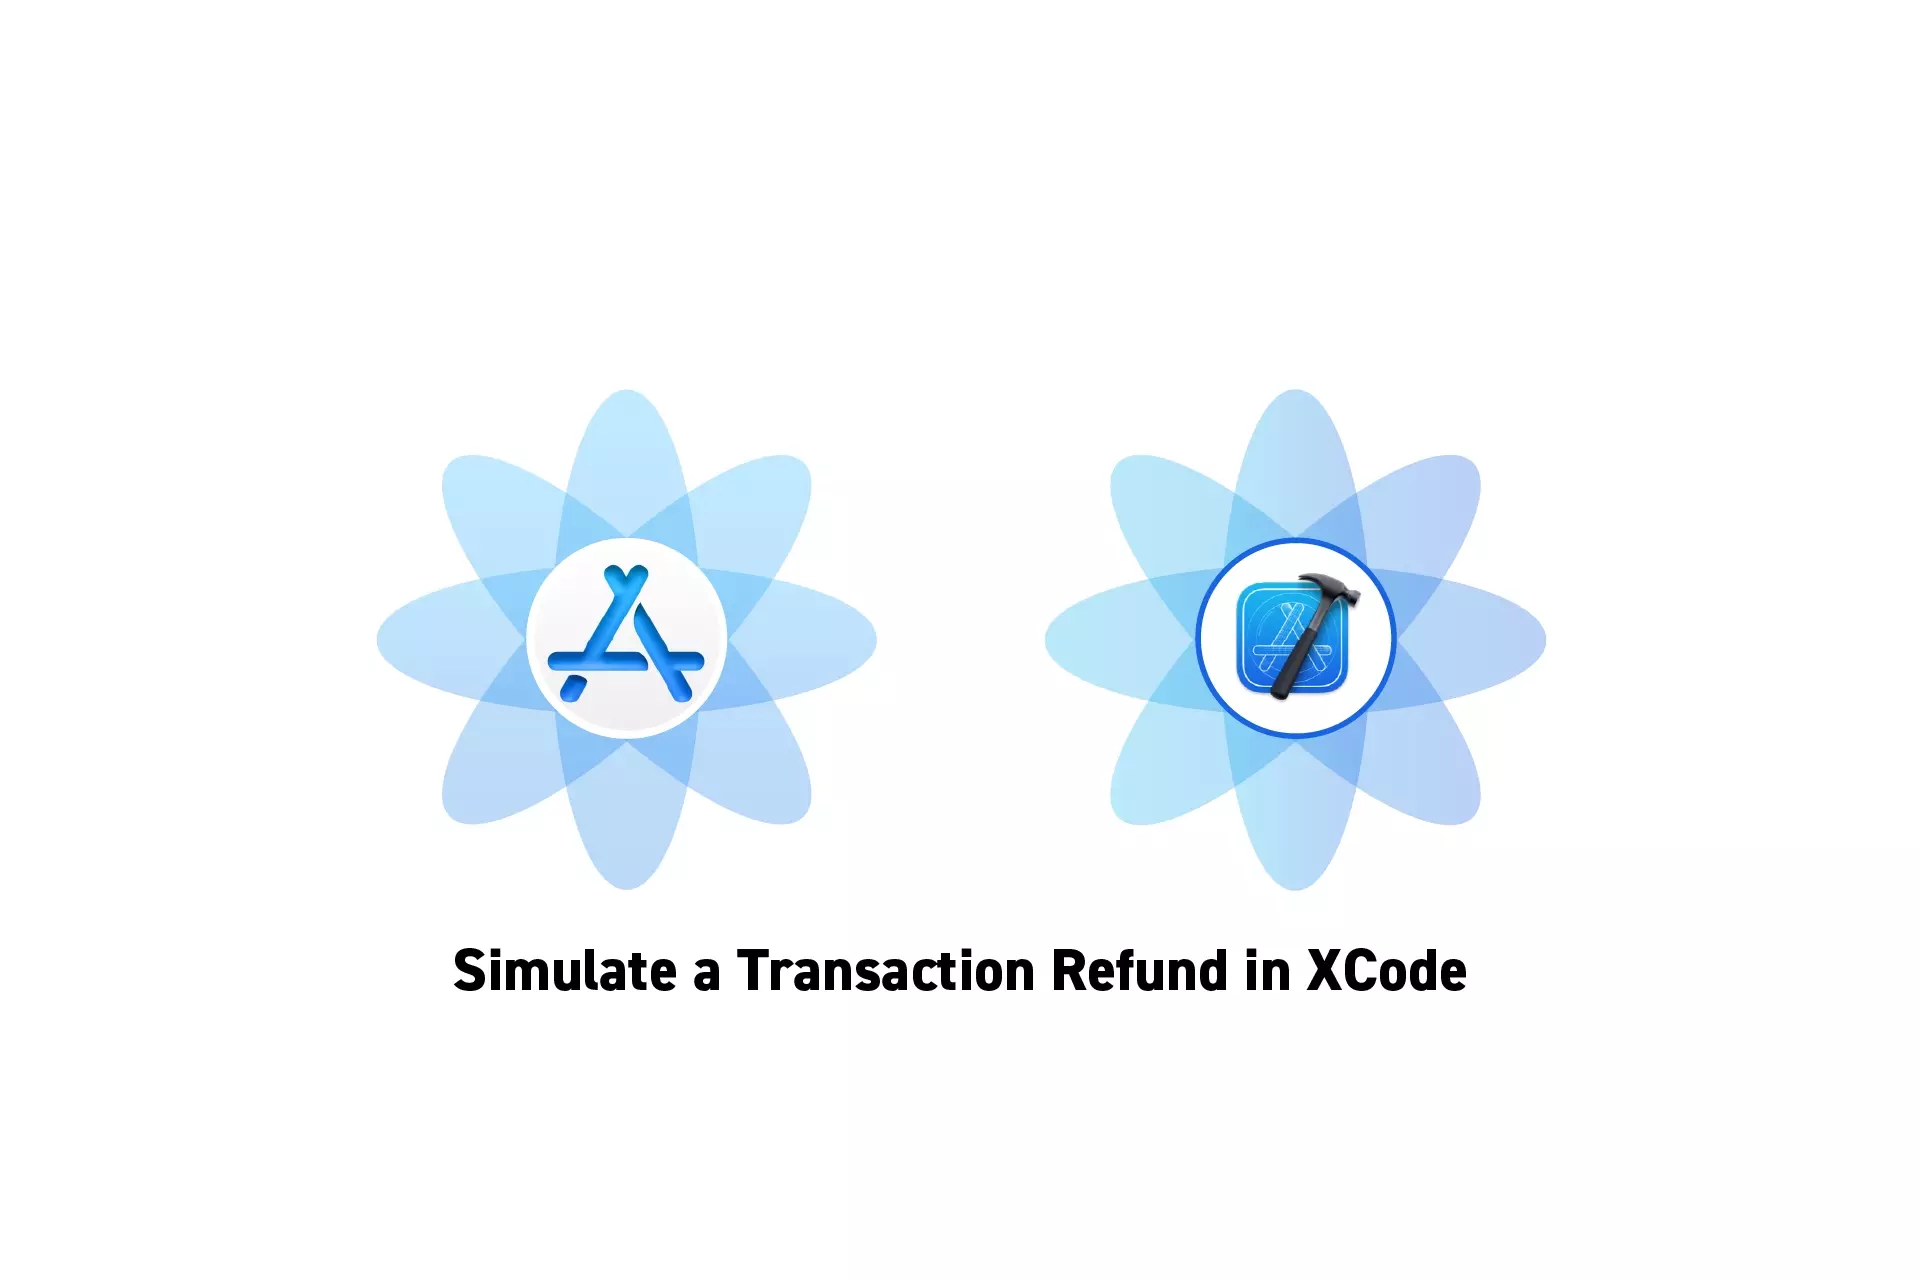 Two flowers that represent StoreKit and XCode side by side. Beneath them sits the text “Simulate a Transaction Refund in XCode.”